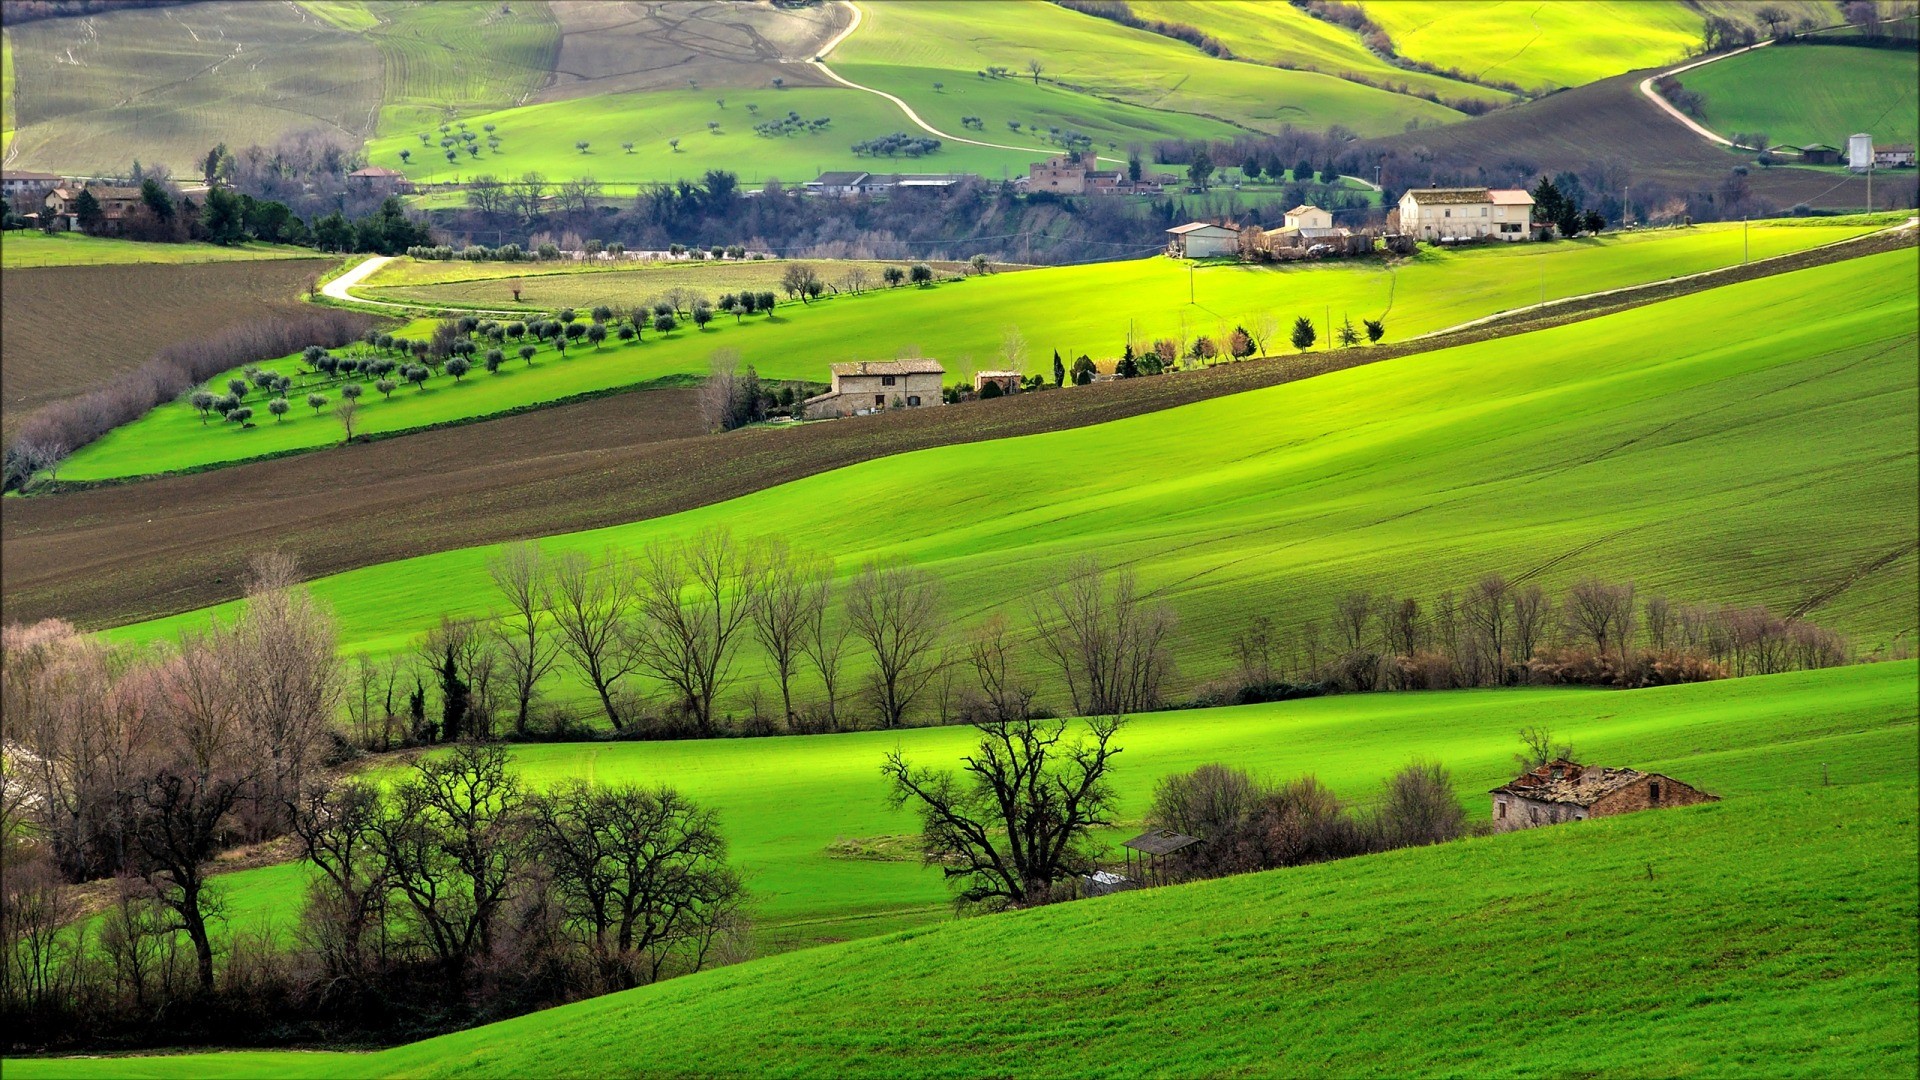 General 1920x1080 Italy landscape field trees hills nature green